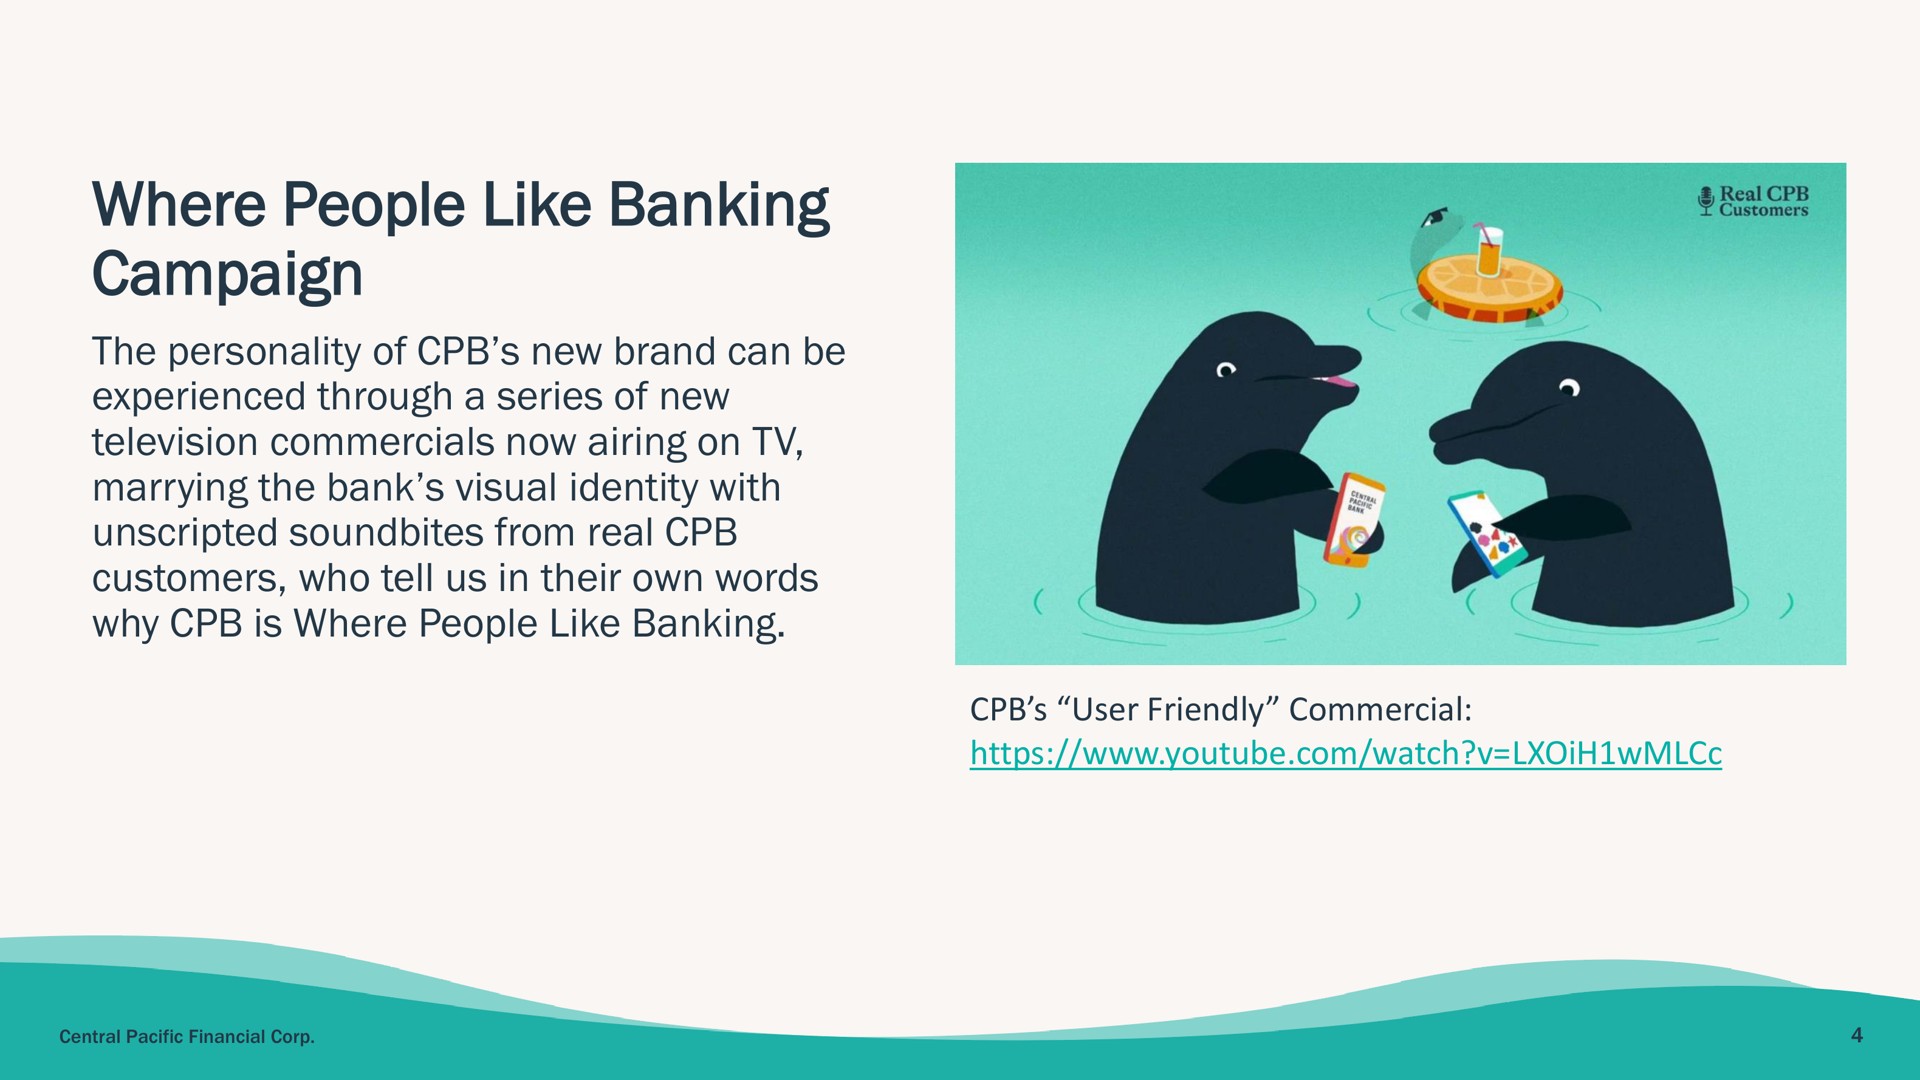 where people like banking campaign the personality of new brand can be experienced through a series of new television commercials now airing on marrying the bank visual identity with from real customers who tell us in their own words why is where people like banking boo | Central Pacific Financial